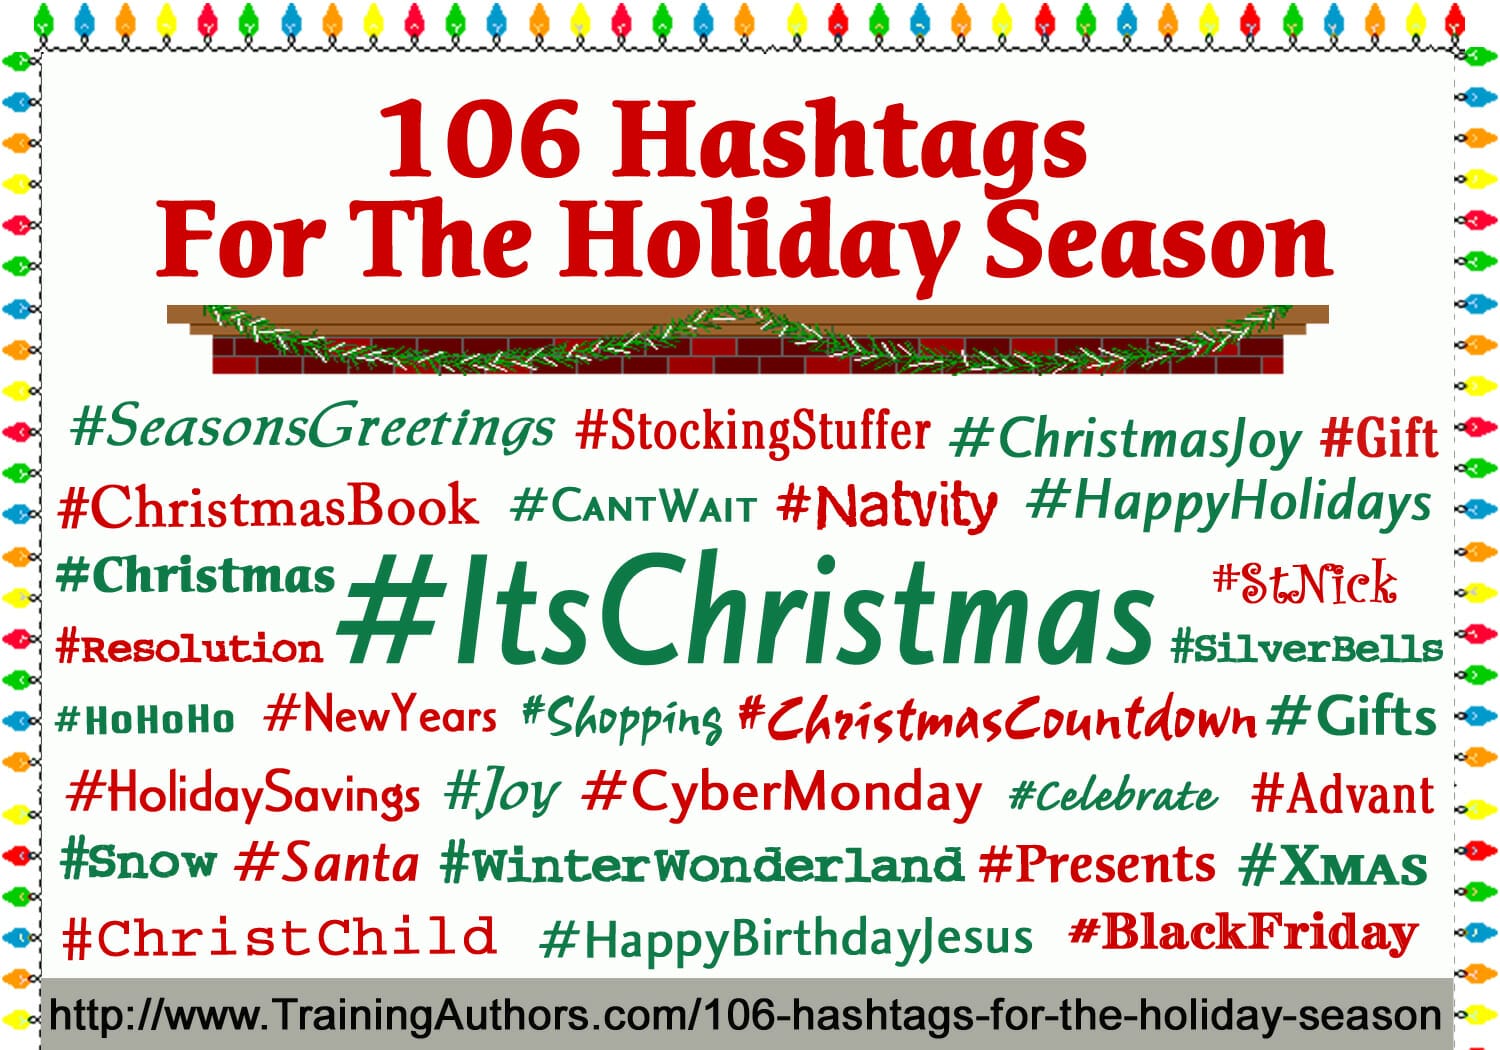 106 Hashtags for the Holiday Season Training Authors with CJ and